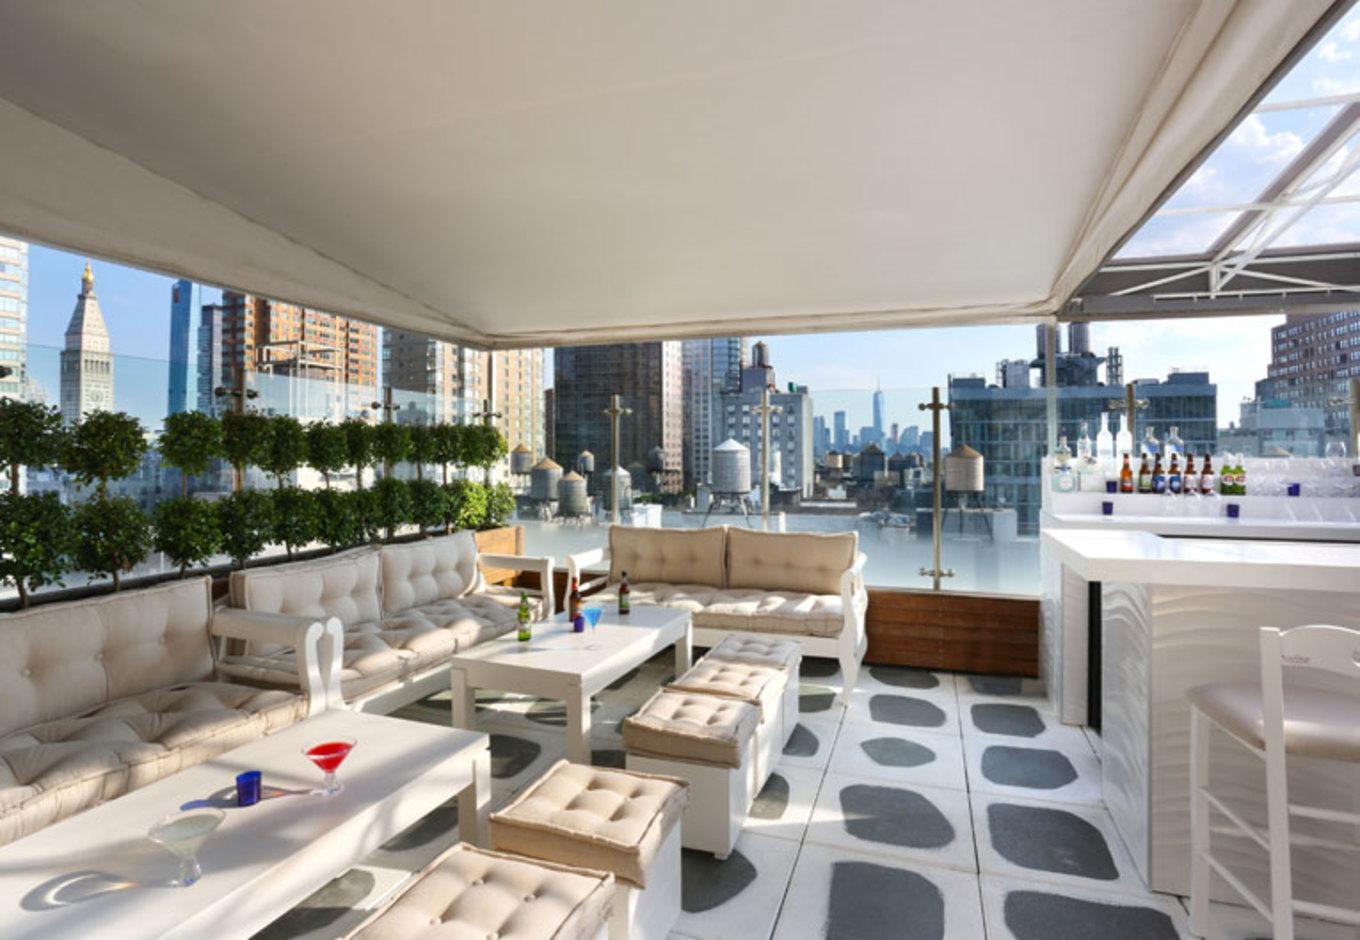 1/17 Rooftop Vibes | Holy Brunch Sundays | NYC skyline view